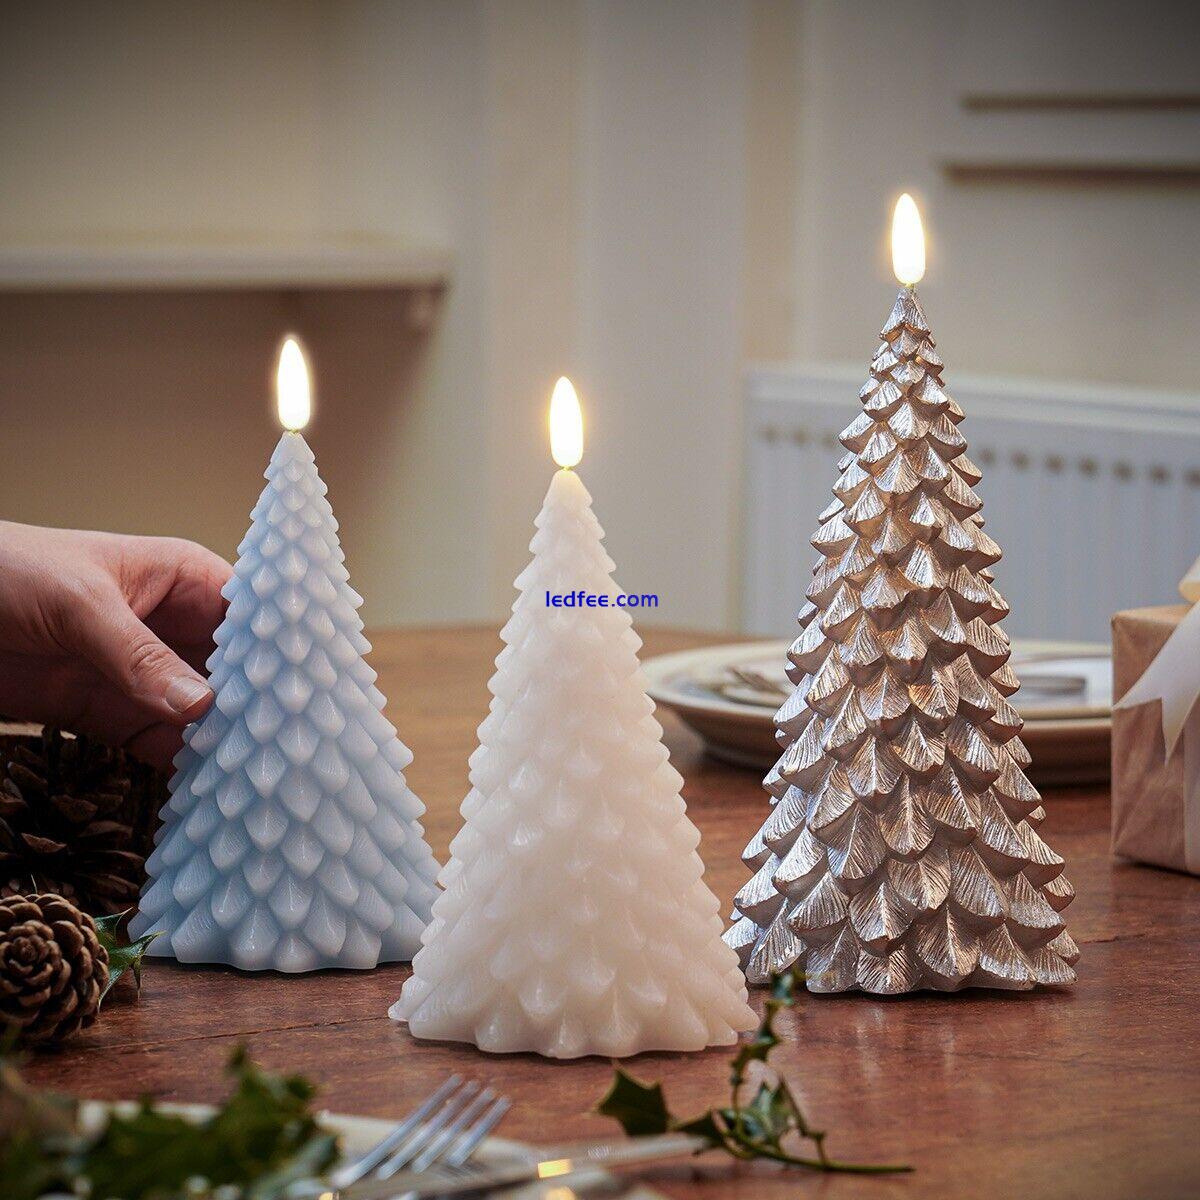 3 PACK | Icy Christmas Tree LED Battery Real Wax Light Up Flickering Candles 0 